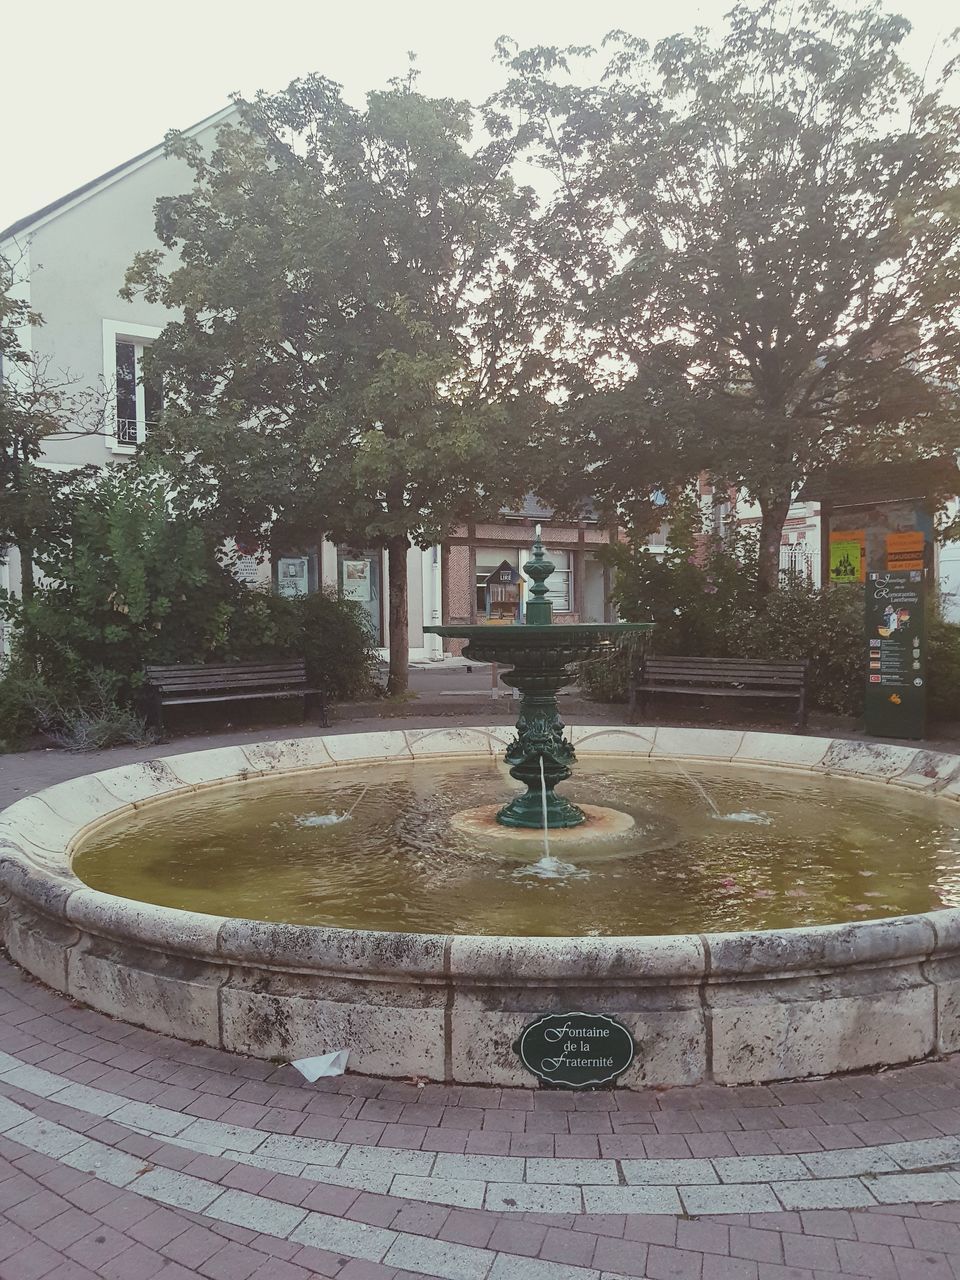 FOUNTAIN IN PARK BY BUILDING